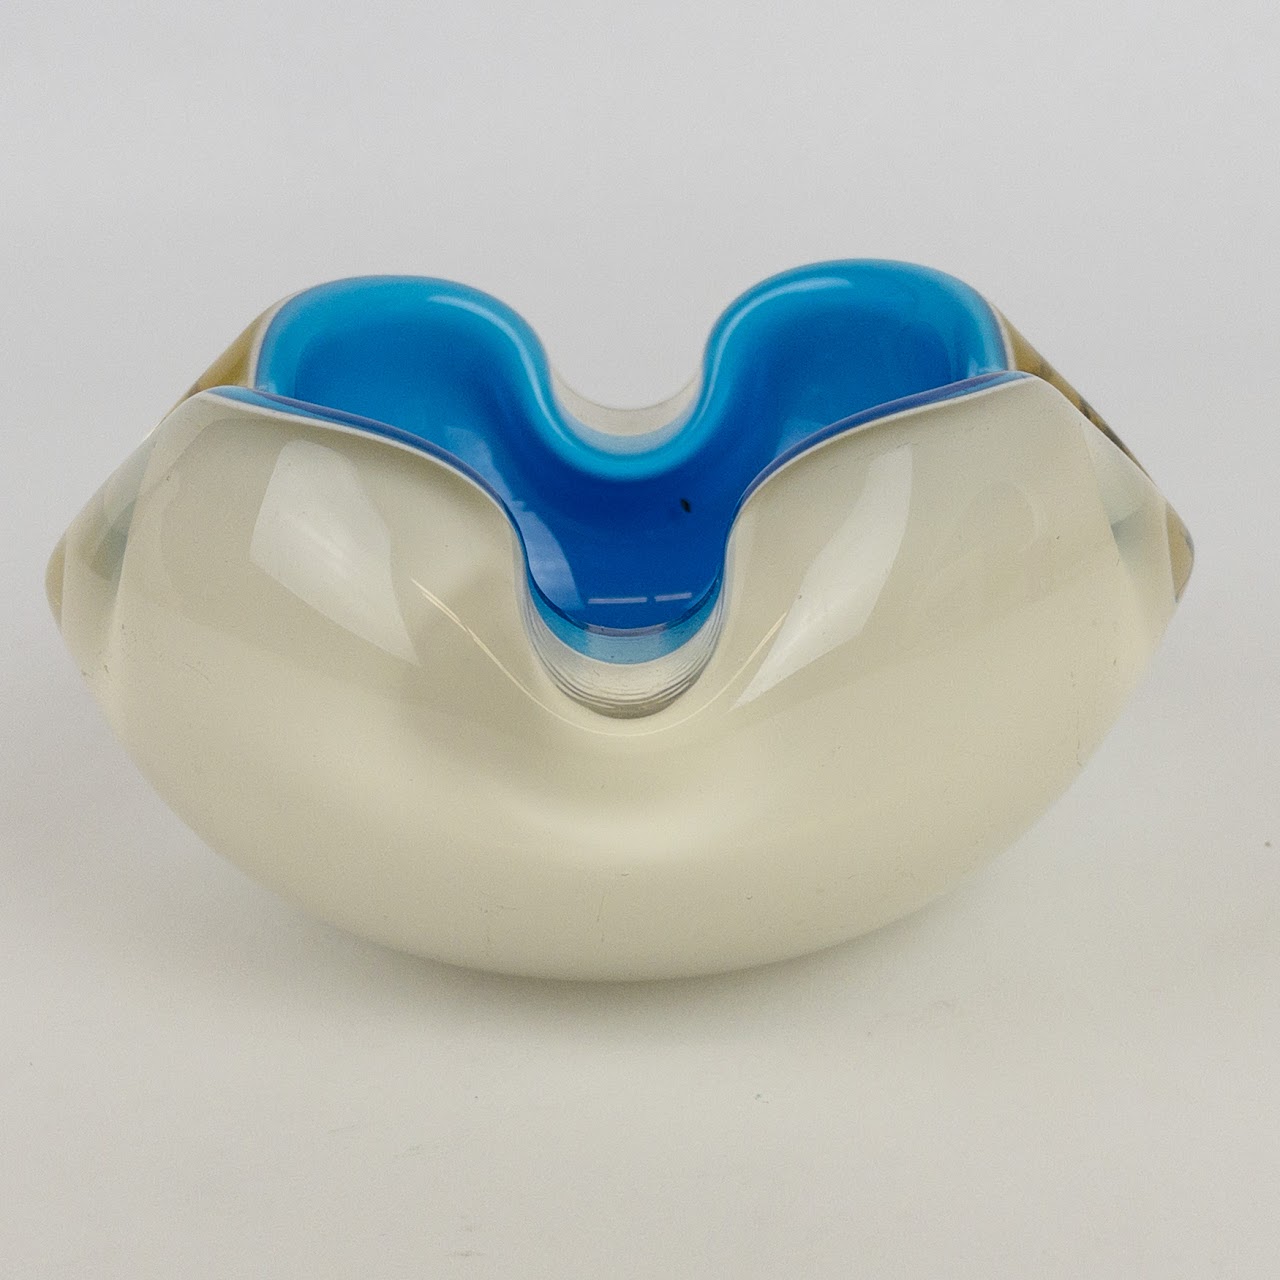 Two-Toned Art Glass Ash Tray